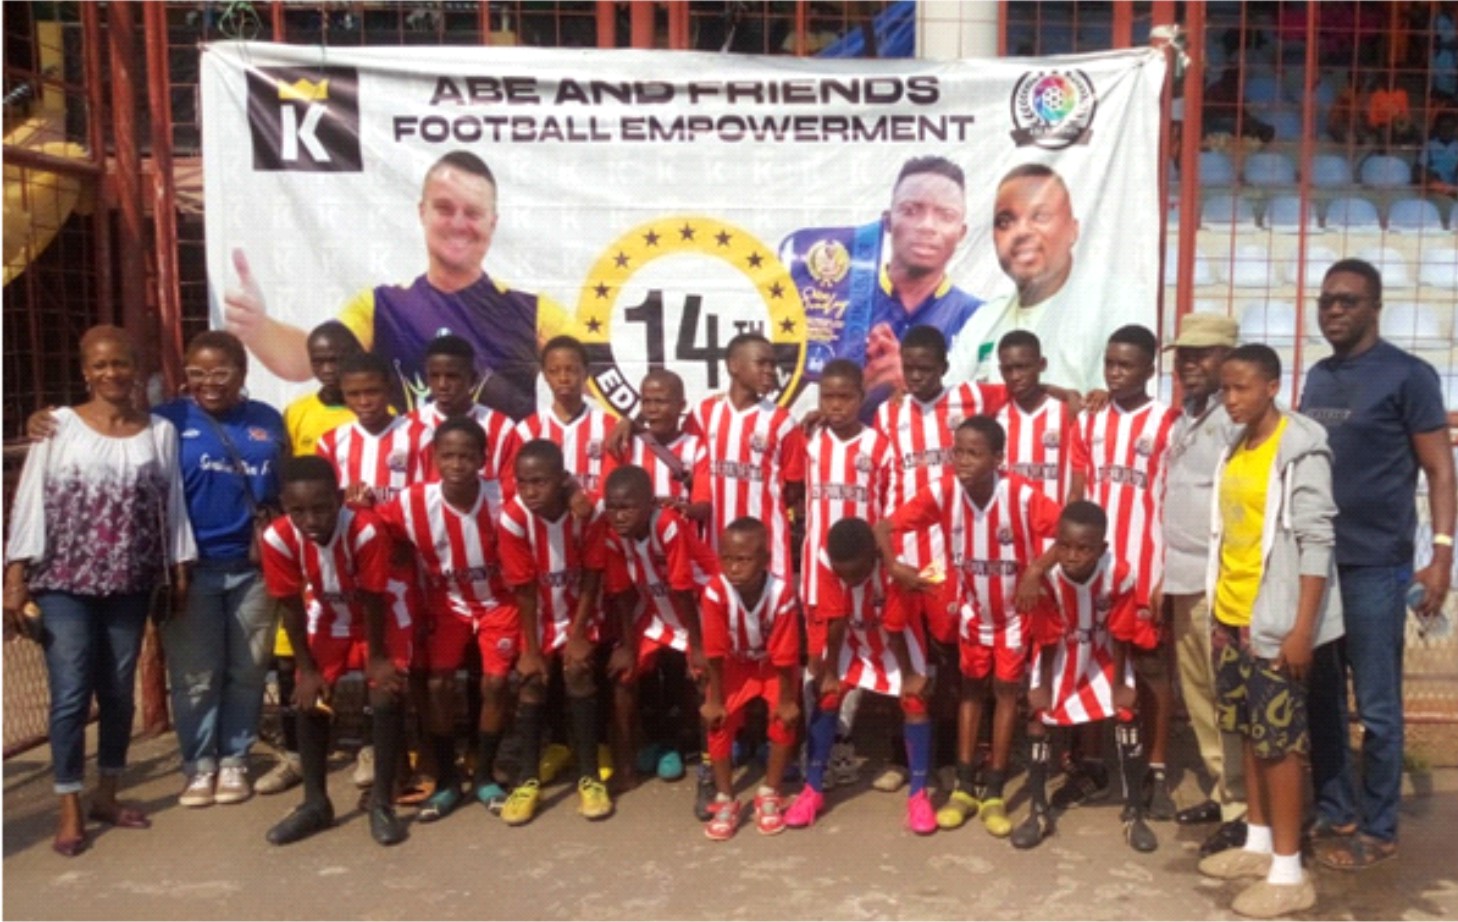 Sunshine Stars captain Sunday Abe has charged upcoming football stars in Ondo State and beyond to combine education with their careers. 
He said the aims and objectives of Abe and Friends foundation was to organize a competition match for U -12 player in the state was to raise future football players in the state and in its environ to stardom.
The Sunshine Stars skipper said the foundation is also encouraging the young players to combine education with football to enable them has some things to fall back on when they retired.
He added that the criteria for participate in the U- 12 football competition was for the underage players to present their academy report card to the organization before they could be allowed to be part of the competition.
Abe stated this at the end of the 14th edition of Abe and Friends football reunion held at the Ondo State Sports complex, Akure the state capital.
He disclosed that the outstanding players among the U-12 players would be recommended for Nigeria national U 15 team.
He said: We have been doing this in the last 14years , but I can tell you that this year's event is exceptionally different in term of organisation and the fans turn out .
"We will keep improving on our efforts and in no distant time, the results will be manifesting when the kids from Ondo State will be donning the national colour. 
"We urge our supporters to keep faith with us that we will not disappoint them and the new year will be better in all ramifications."
Cash prizes were presented to the highest goal scorer, MVP and others.
Ex- International fixtured in the ceremonial match include : 2013 African Cup winner, Cup winner, Geoffrey Oboabana, Tunde Adeniji, Franklin Sasere among others.